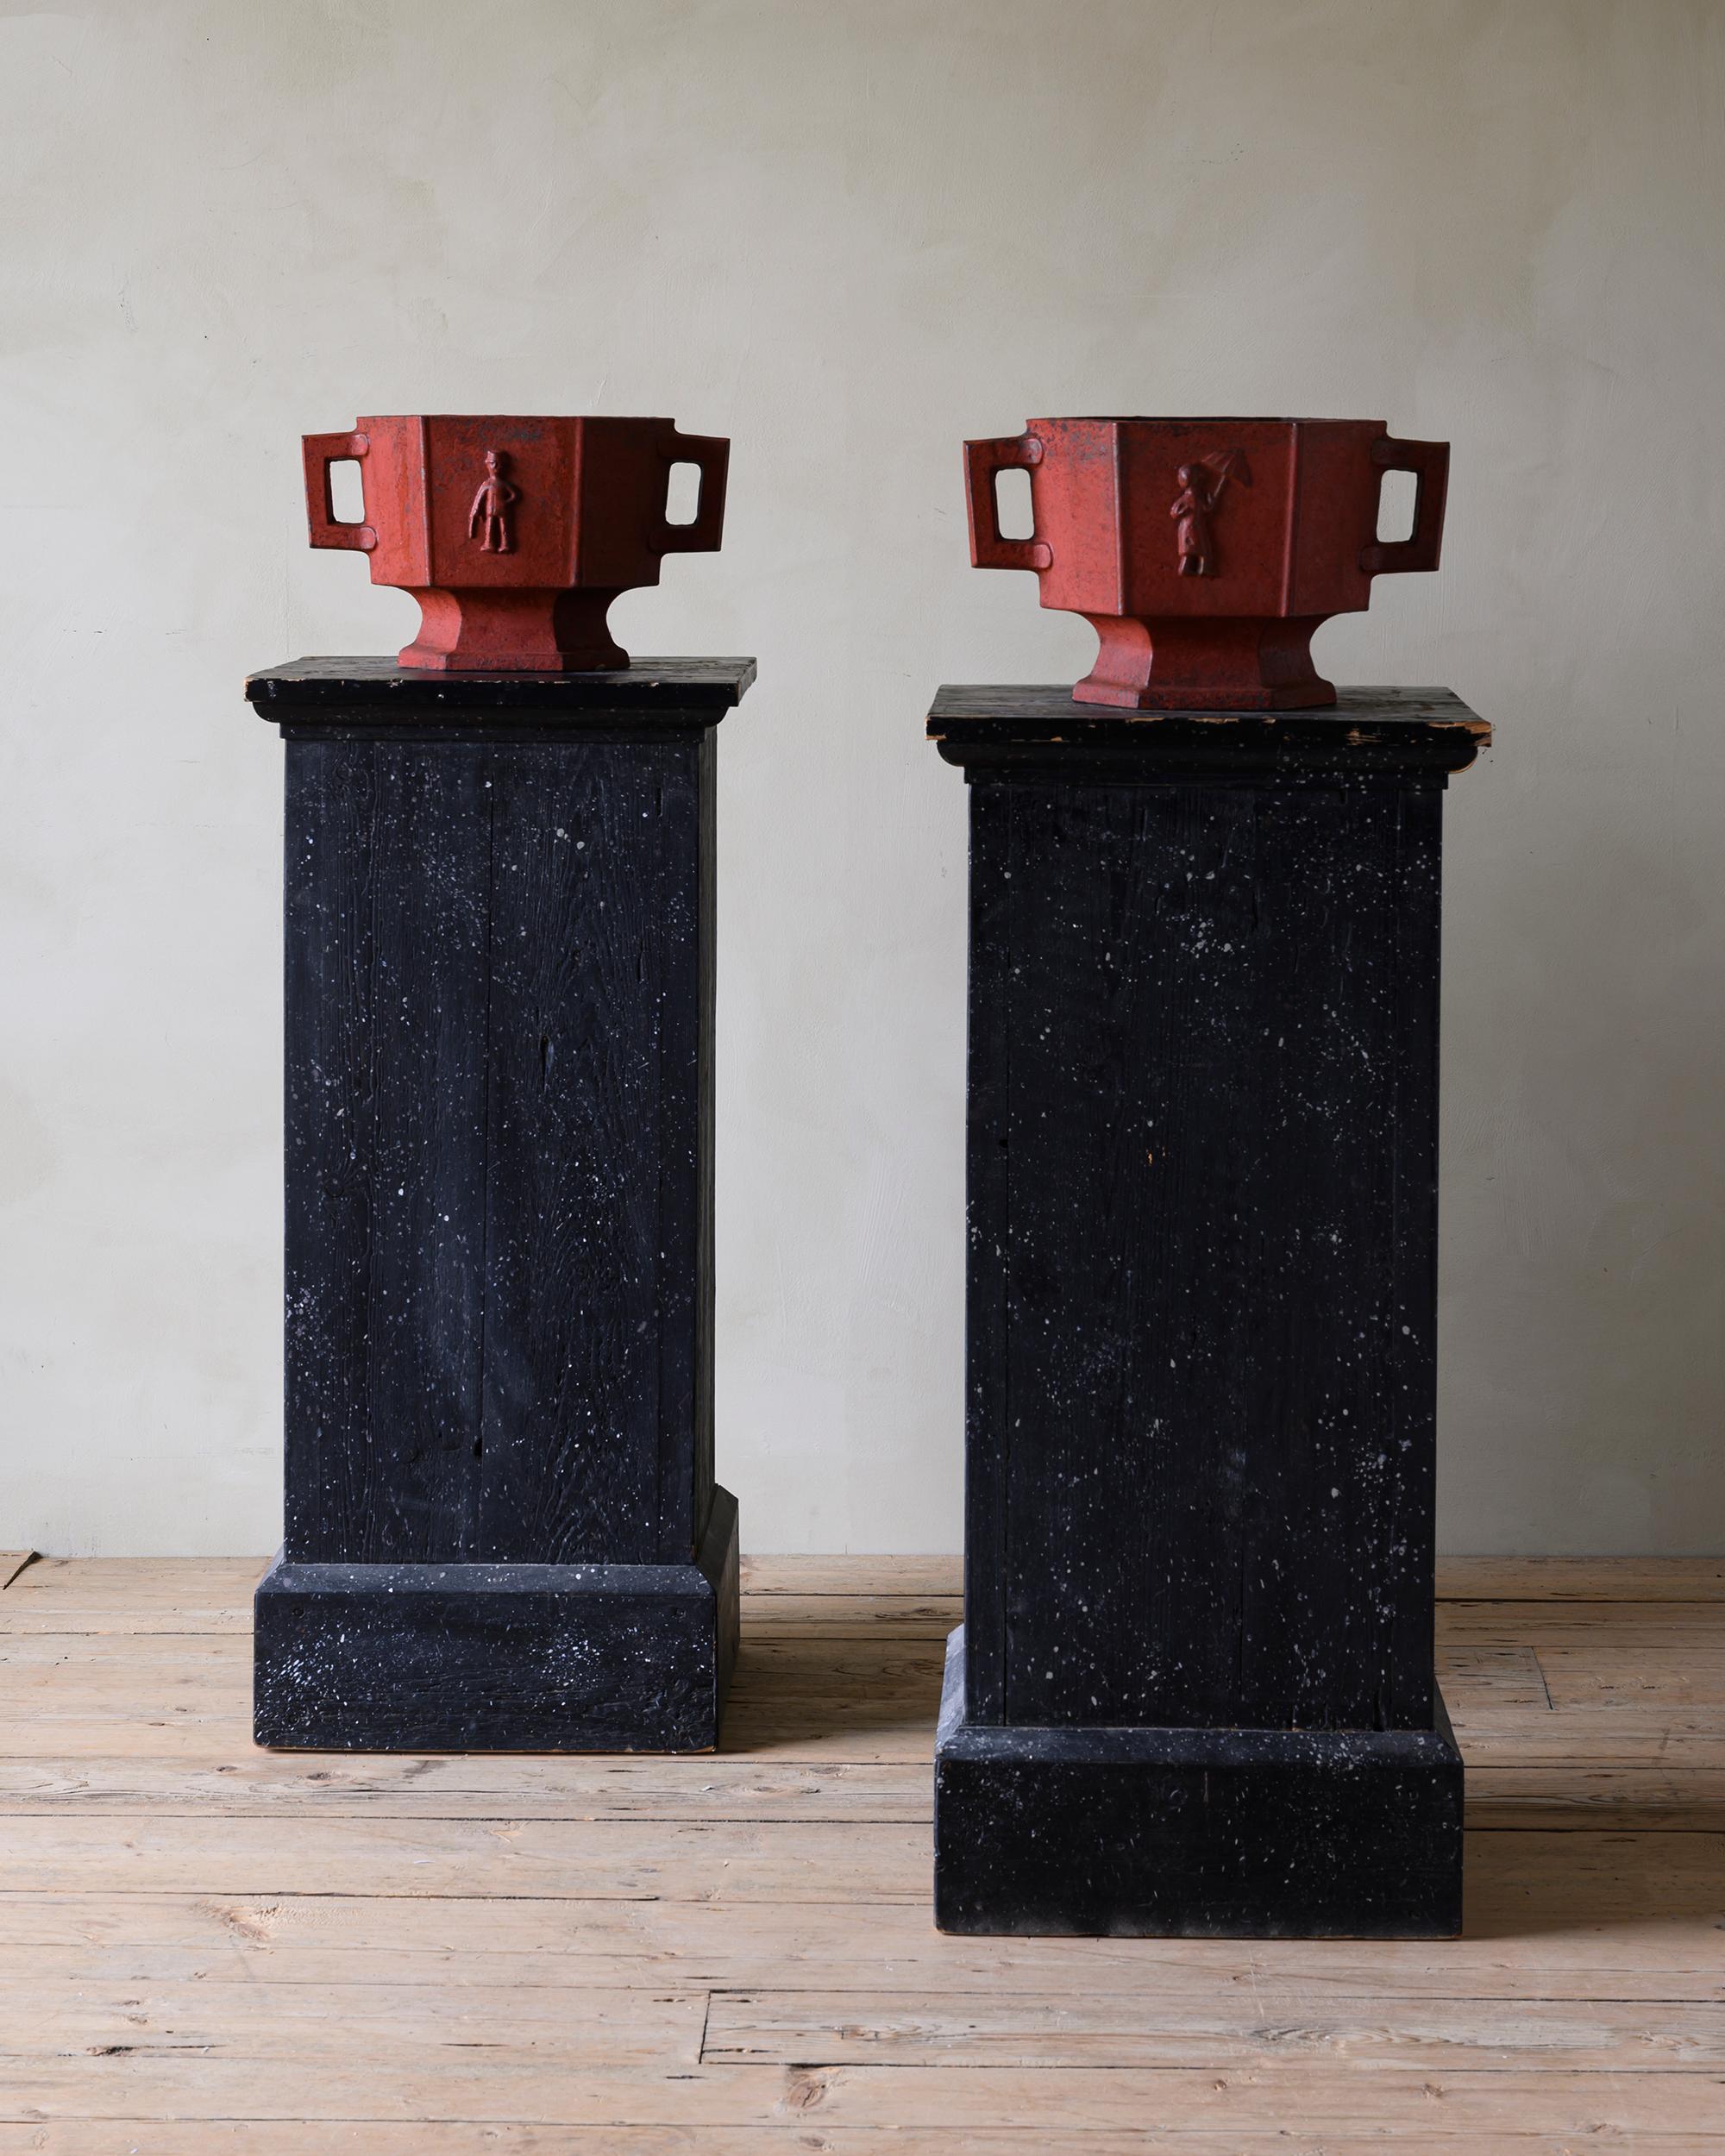 Fine pair of Swedish Grace (art deco) cast iron urns or planters depicting a man with a walking stick and a woman with an umbrella. In their original red finish with great patination. 1930s Sweden.